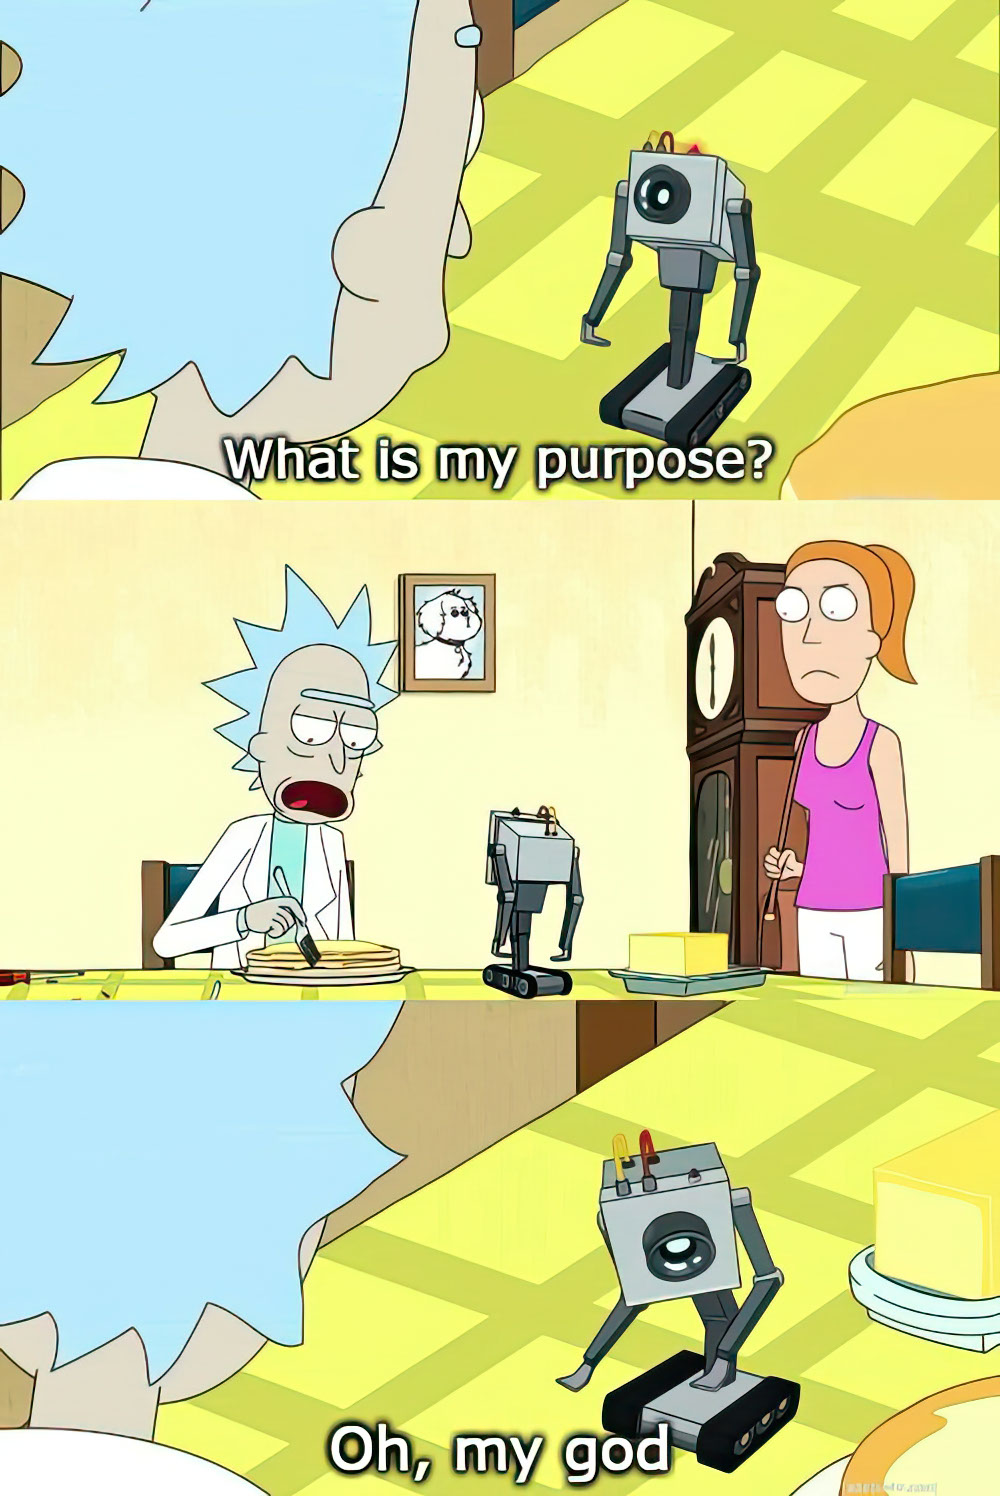 Rick Morty - What is my purpose.jpg